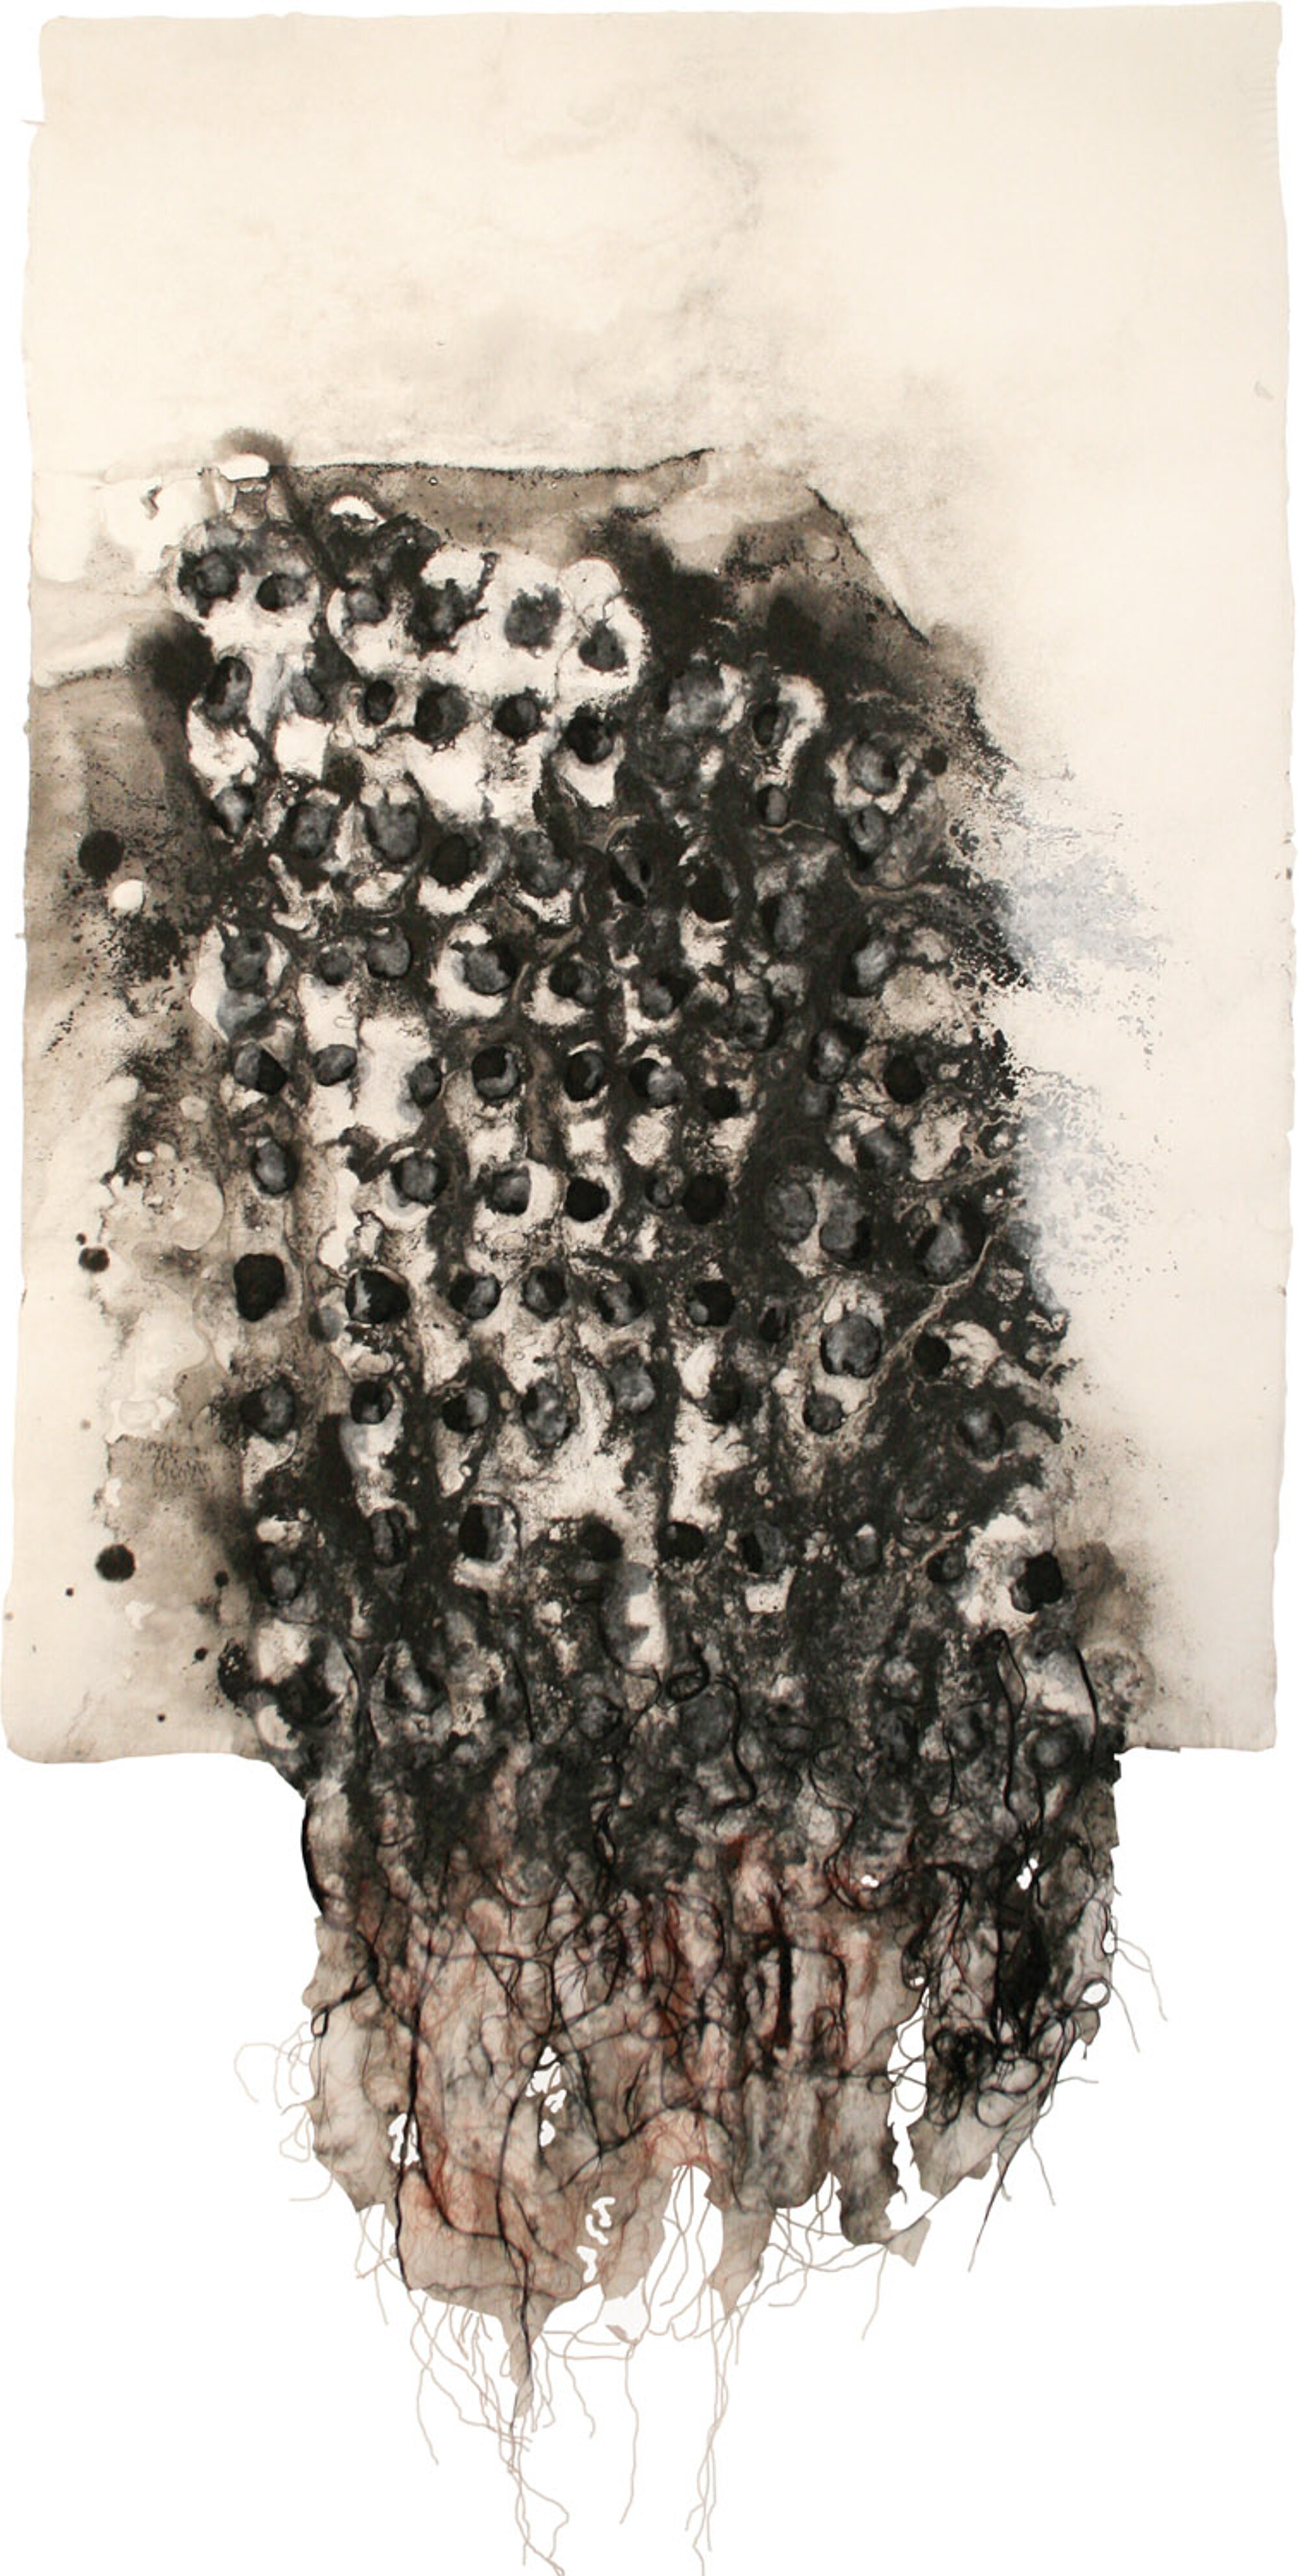   Untitled , 2011 Thread, pigment, fabric, and handmade paper 42 x 22 in. 